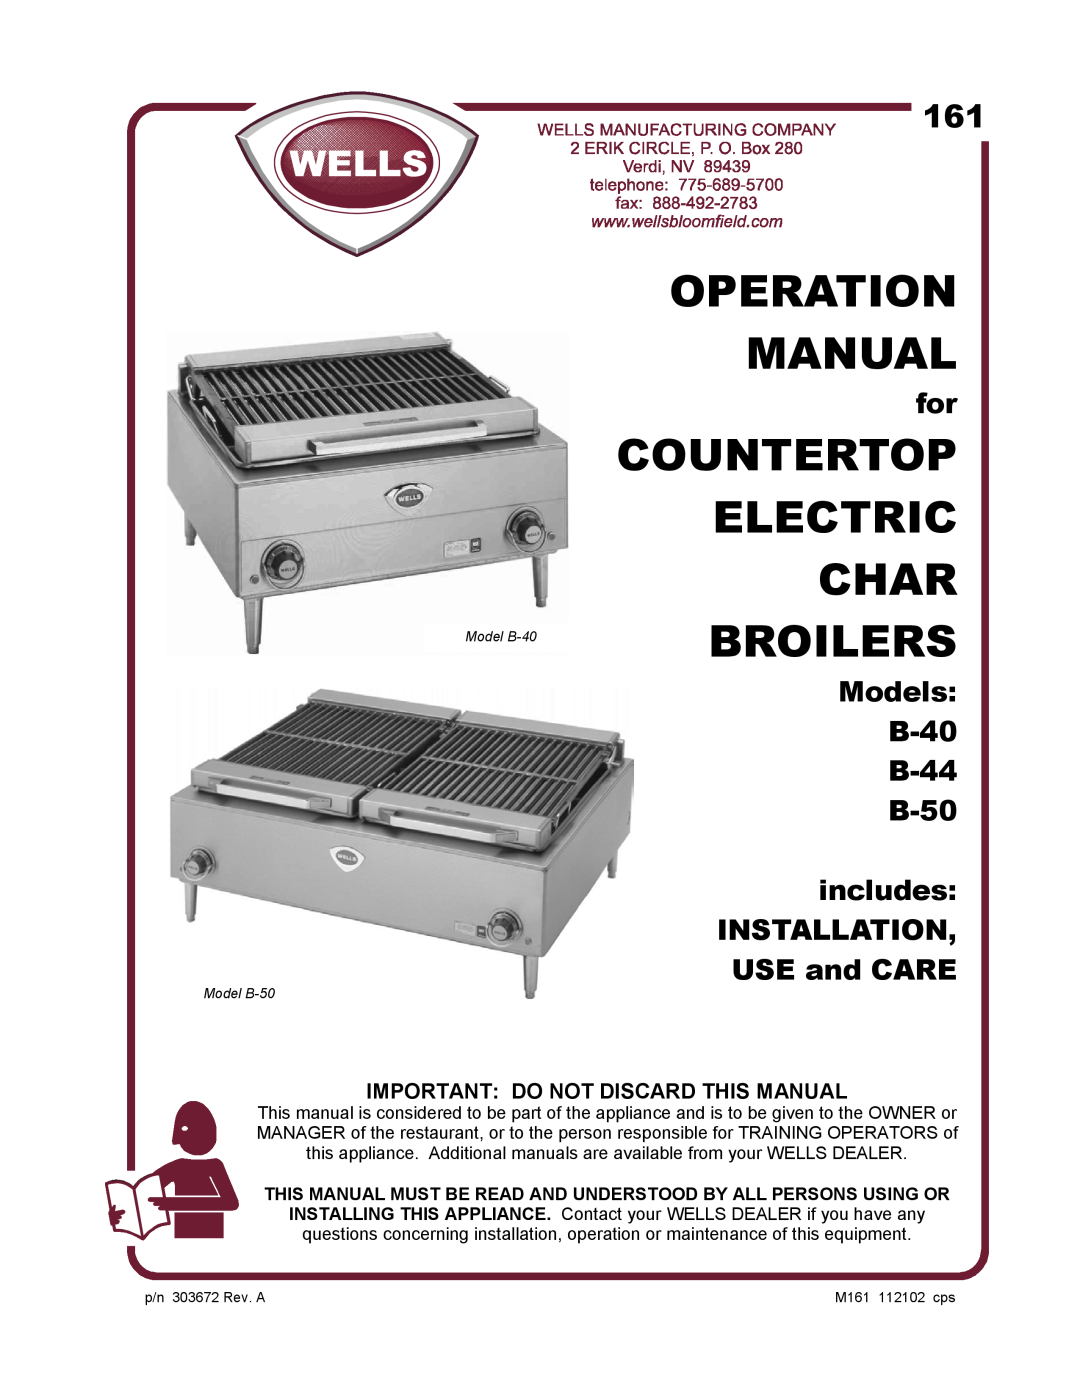 Wells operation manual Important Do Not Discard This Manual, Countertop Electric Char, Models B-40 B-44 B-50 includes 